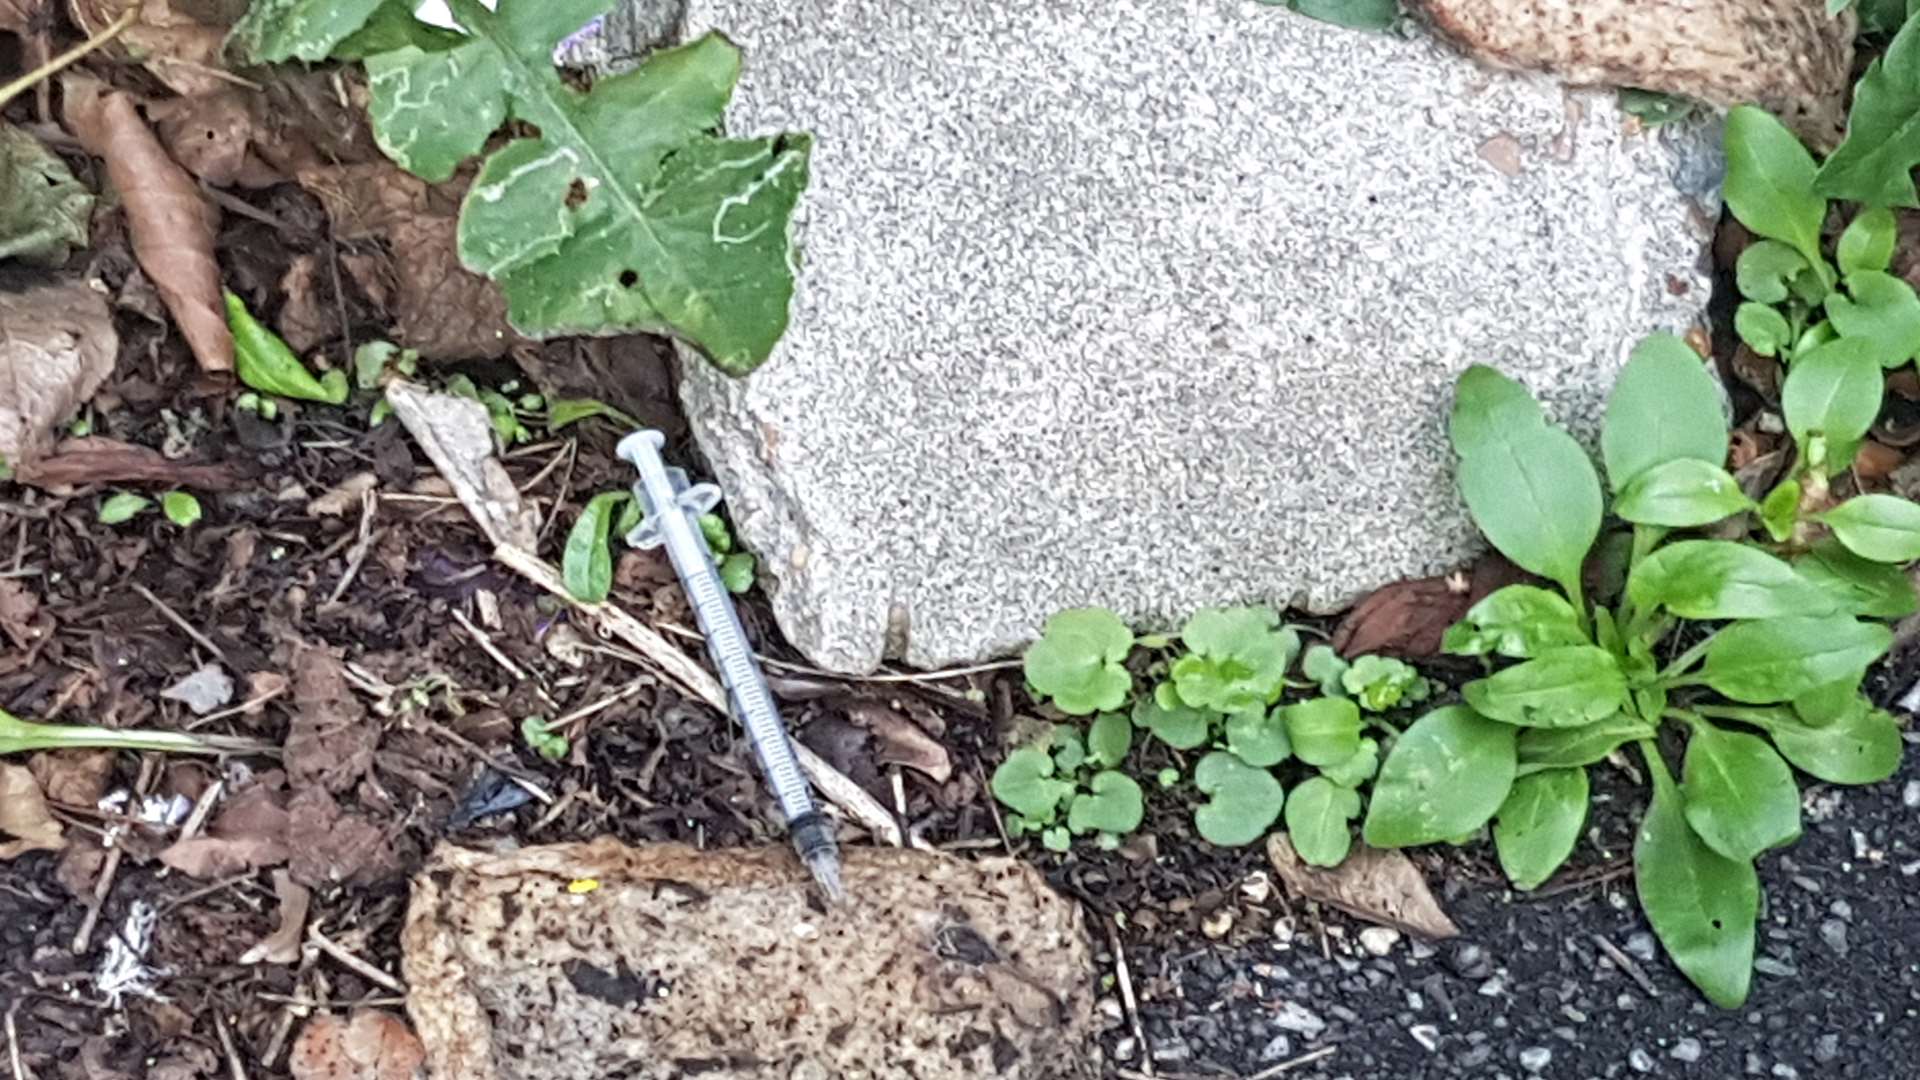 One of three syringes spotted on Sunday afternoon